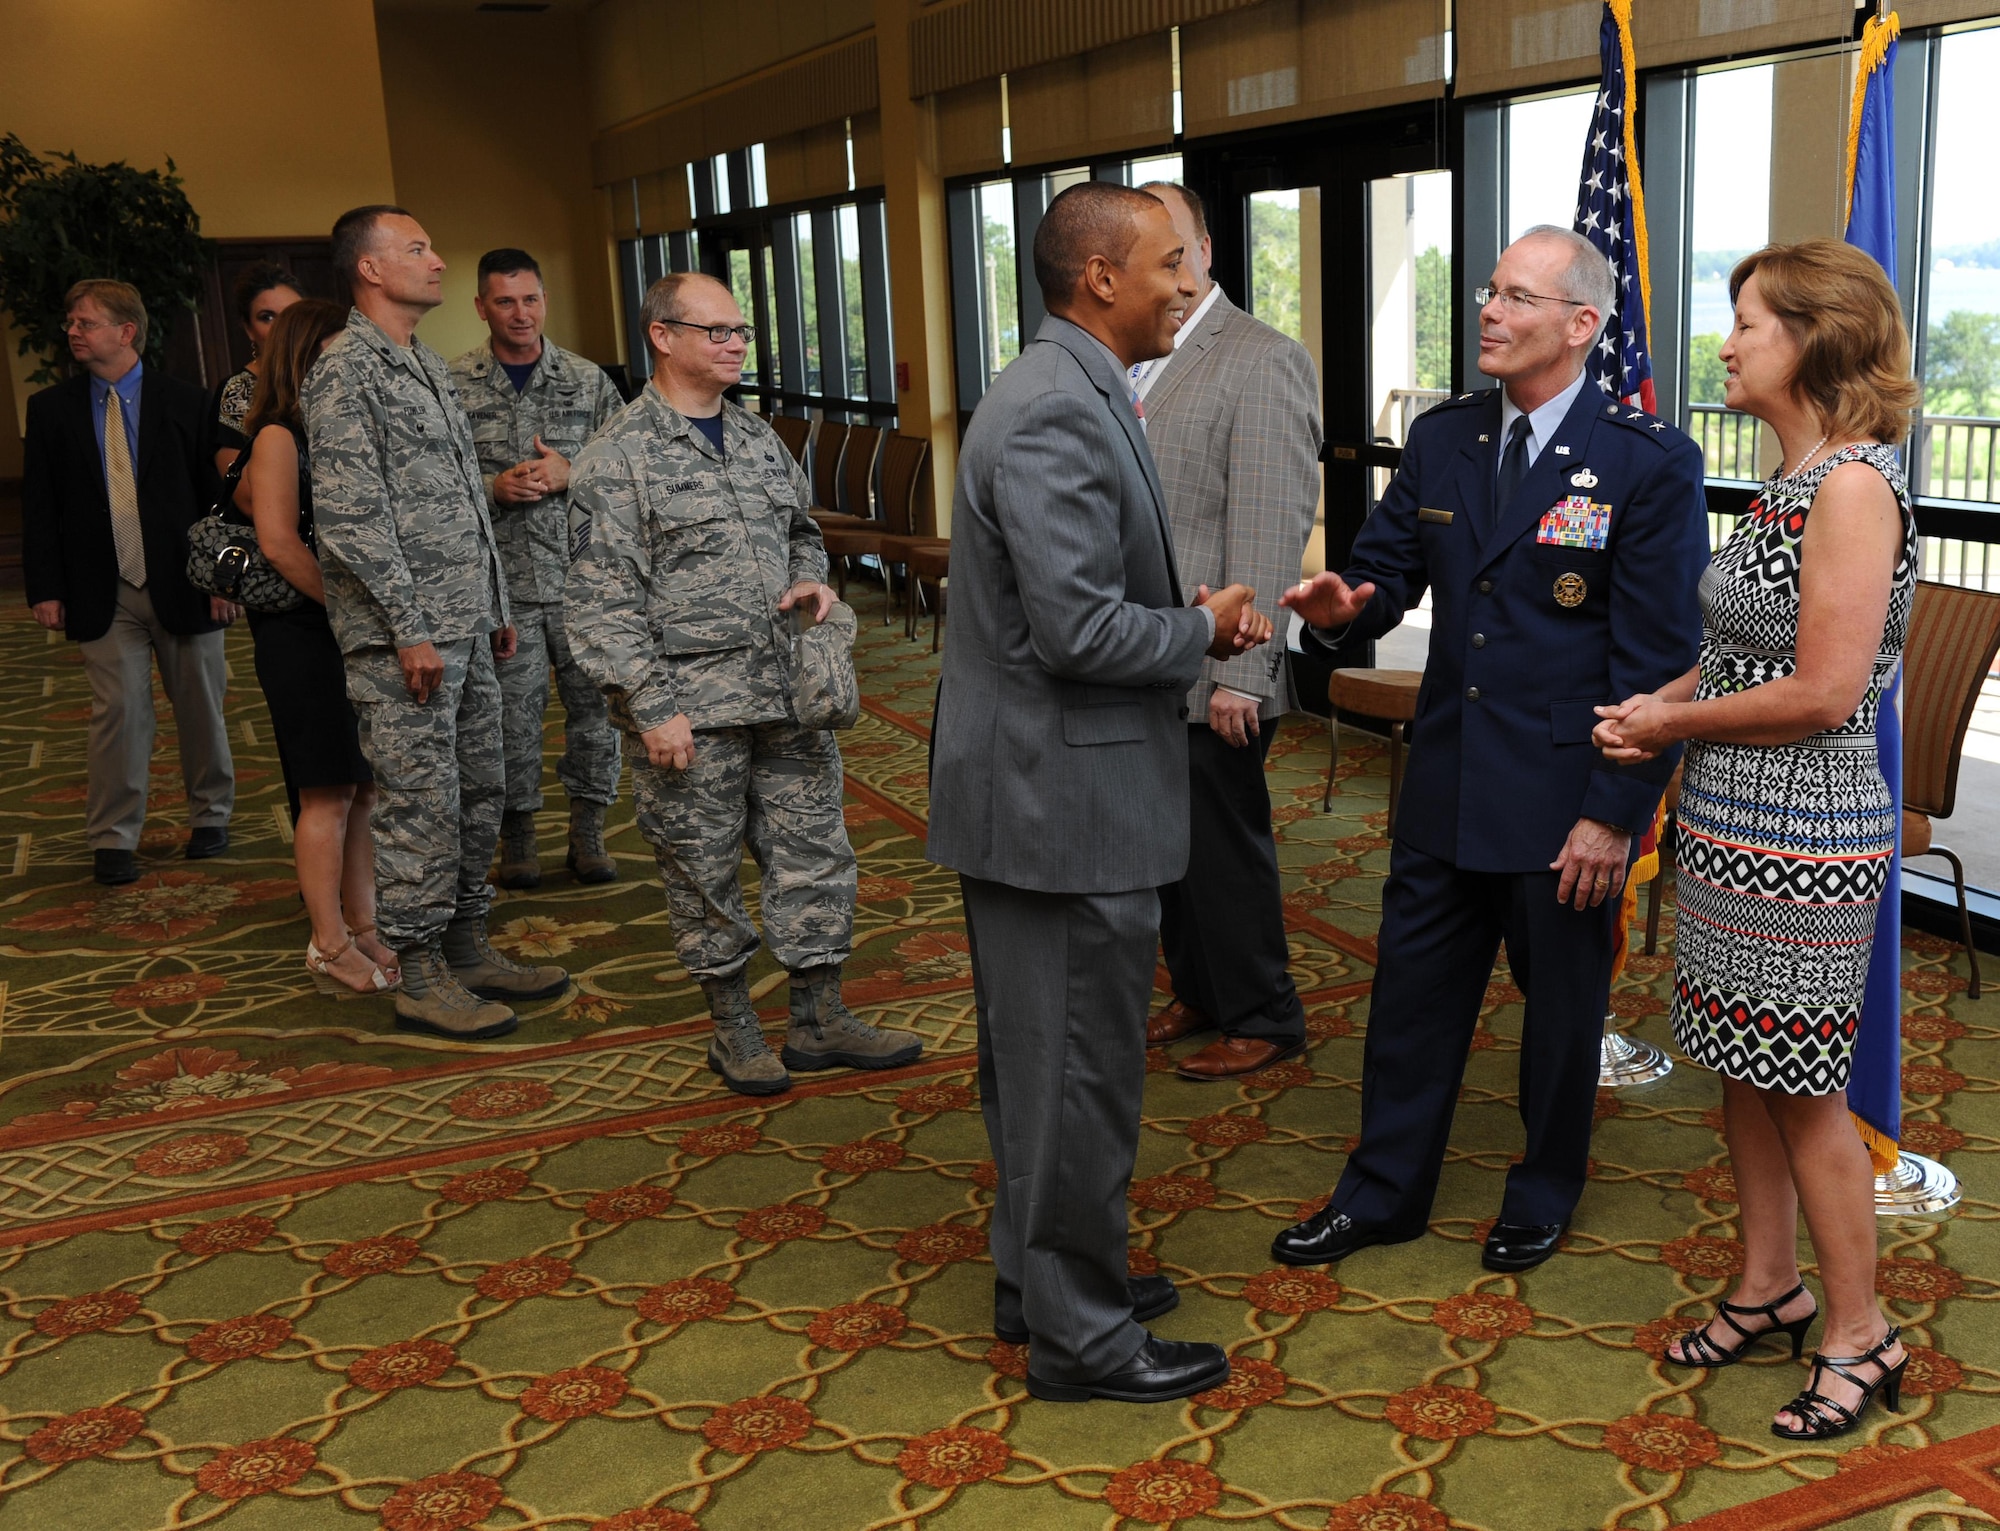 Maj. Gen. Bob LaBrutta, incoming 2nd Air Force commander, and his wife, Leslie, are welcomed by Keesler personnel during the 2nd AF change of command reception  at the Bay Breeze Event Center Aug. 26, 2016, on Keesler Air Force Base, Miss. LaBrutta was previously the 502nd Air Base Wing and Joint Base San Antonio, Texas, commander, and assumed command from Maj. Gen. Mark Brown, who is heading to Joint Base San Antonio-Randolph, Texas, where he will become the Air Education and Training Command vice commander. (U.S. Air Force photo by Kemberly Groue/Released)